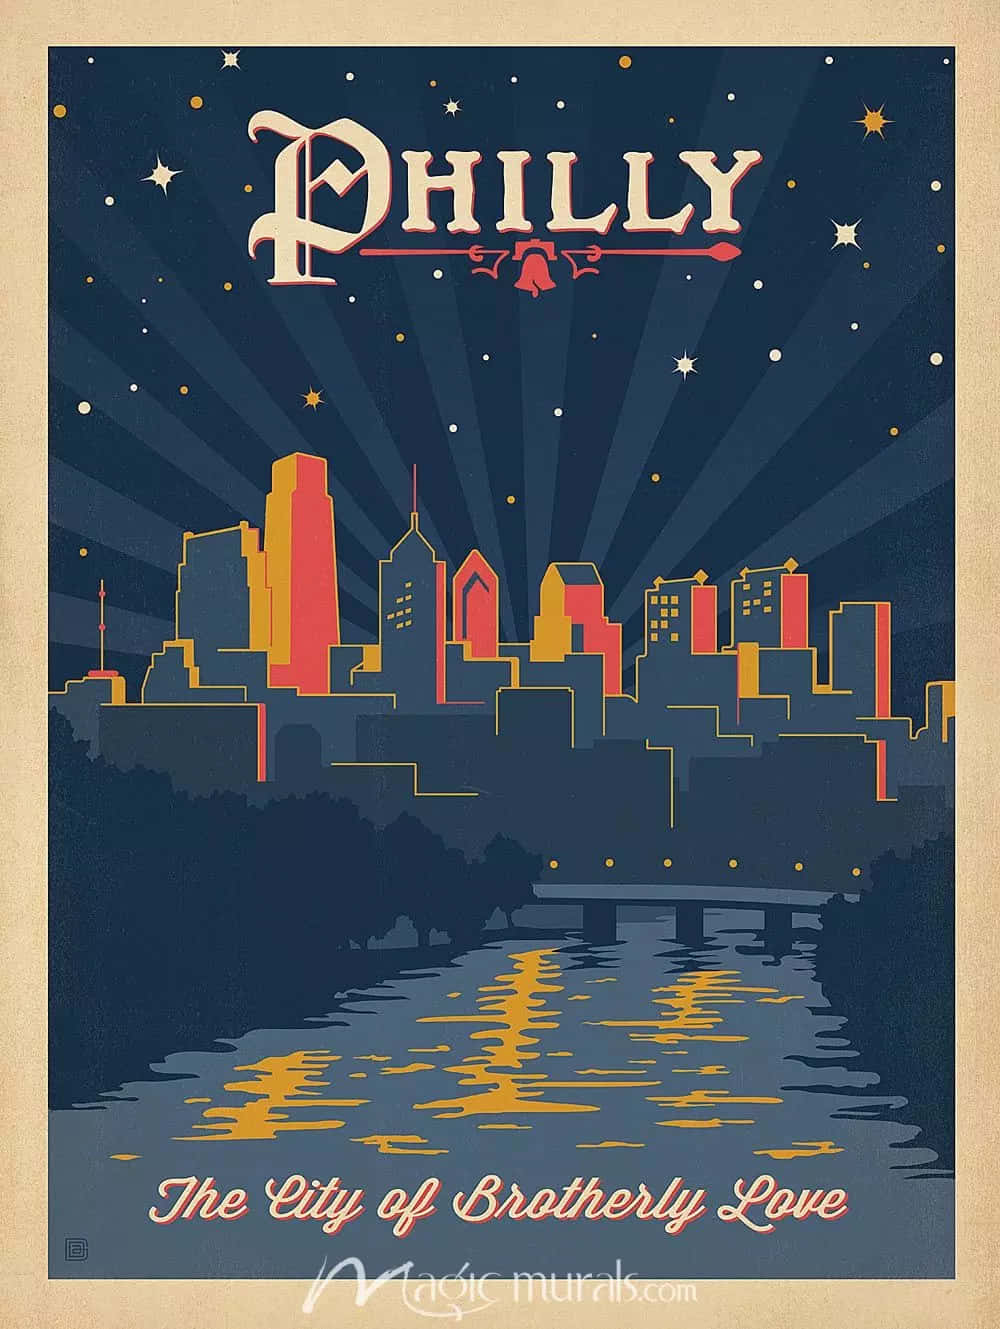 Philly 1000 X 1329 Wallpaper